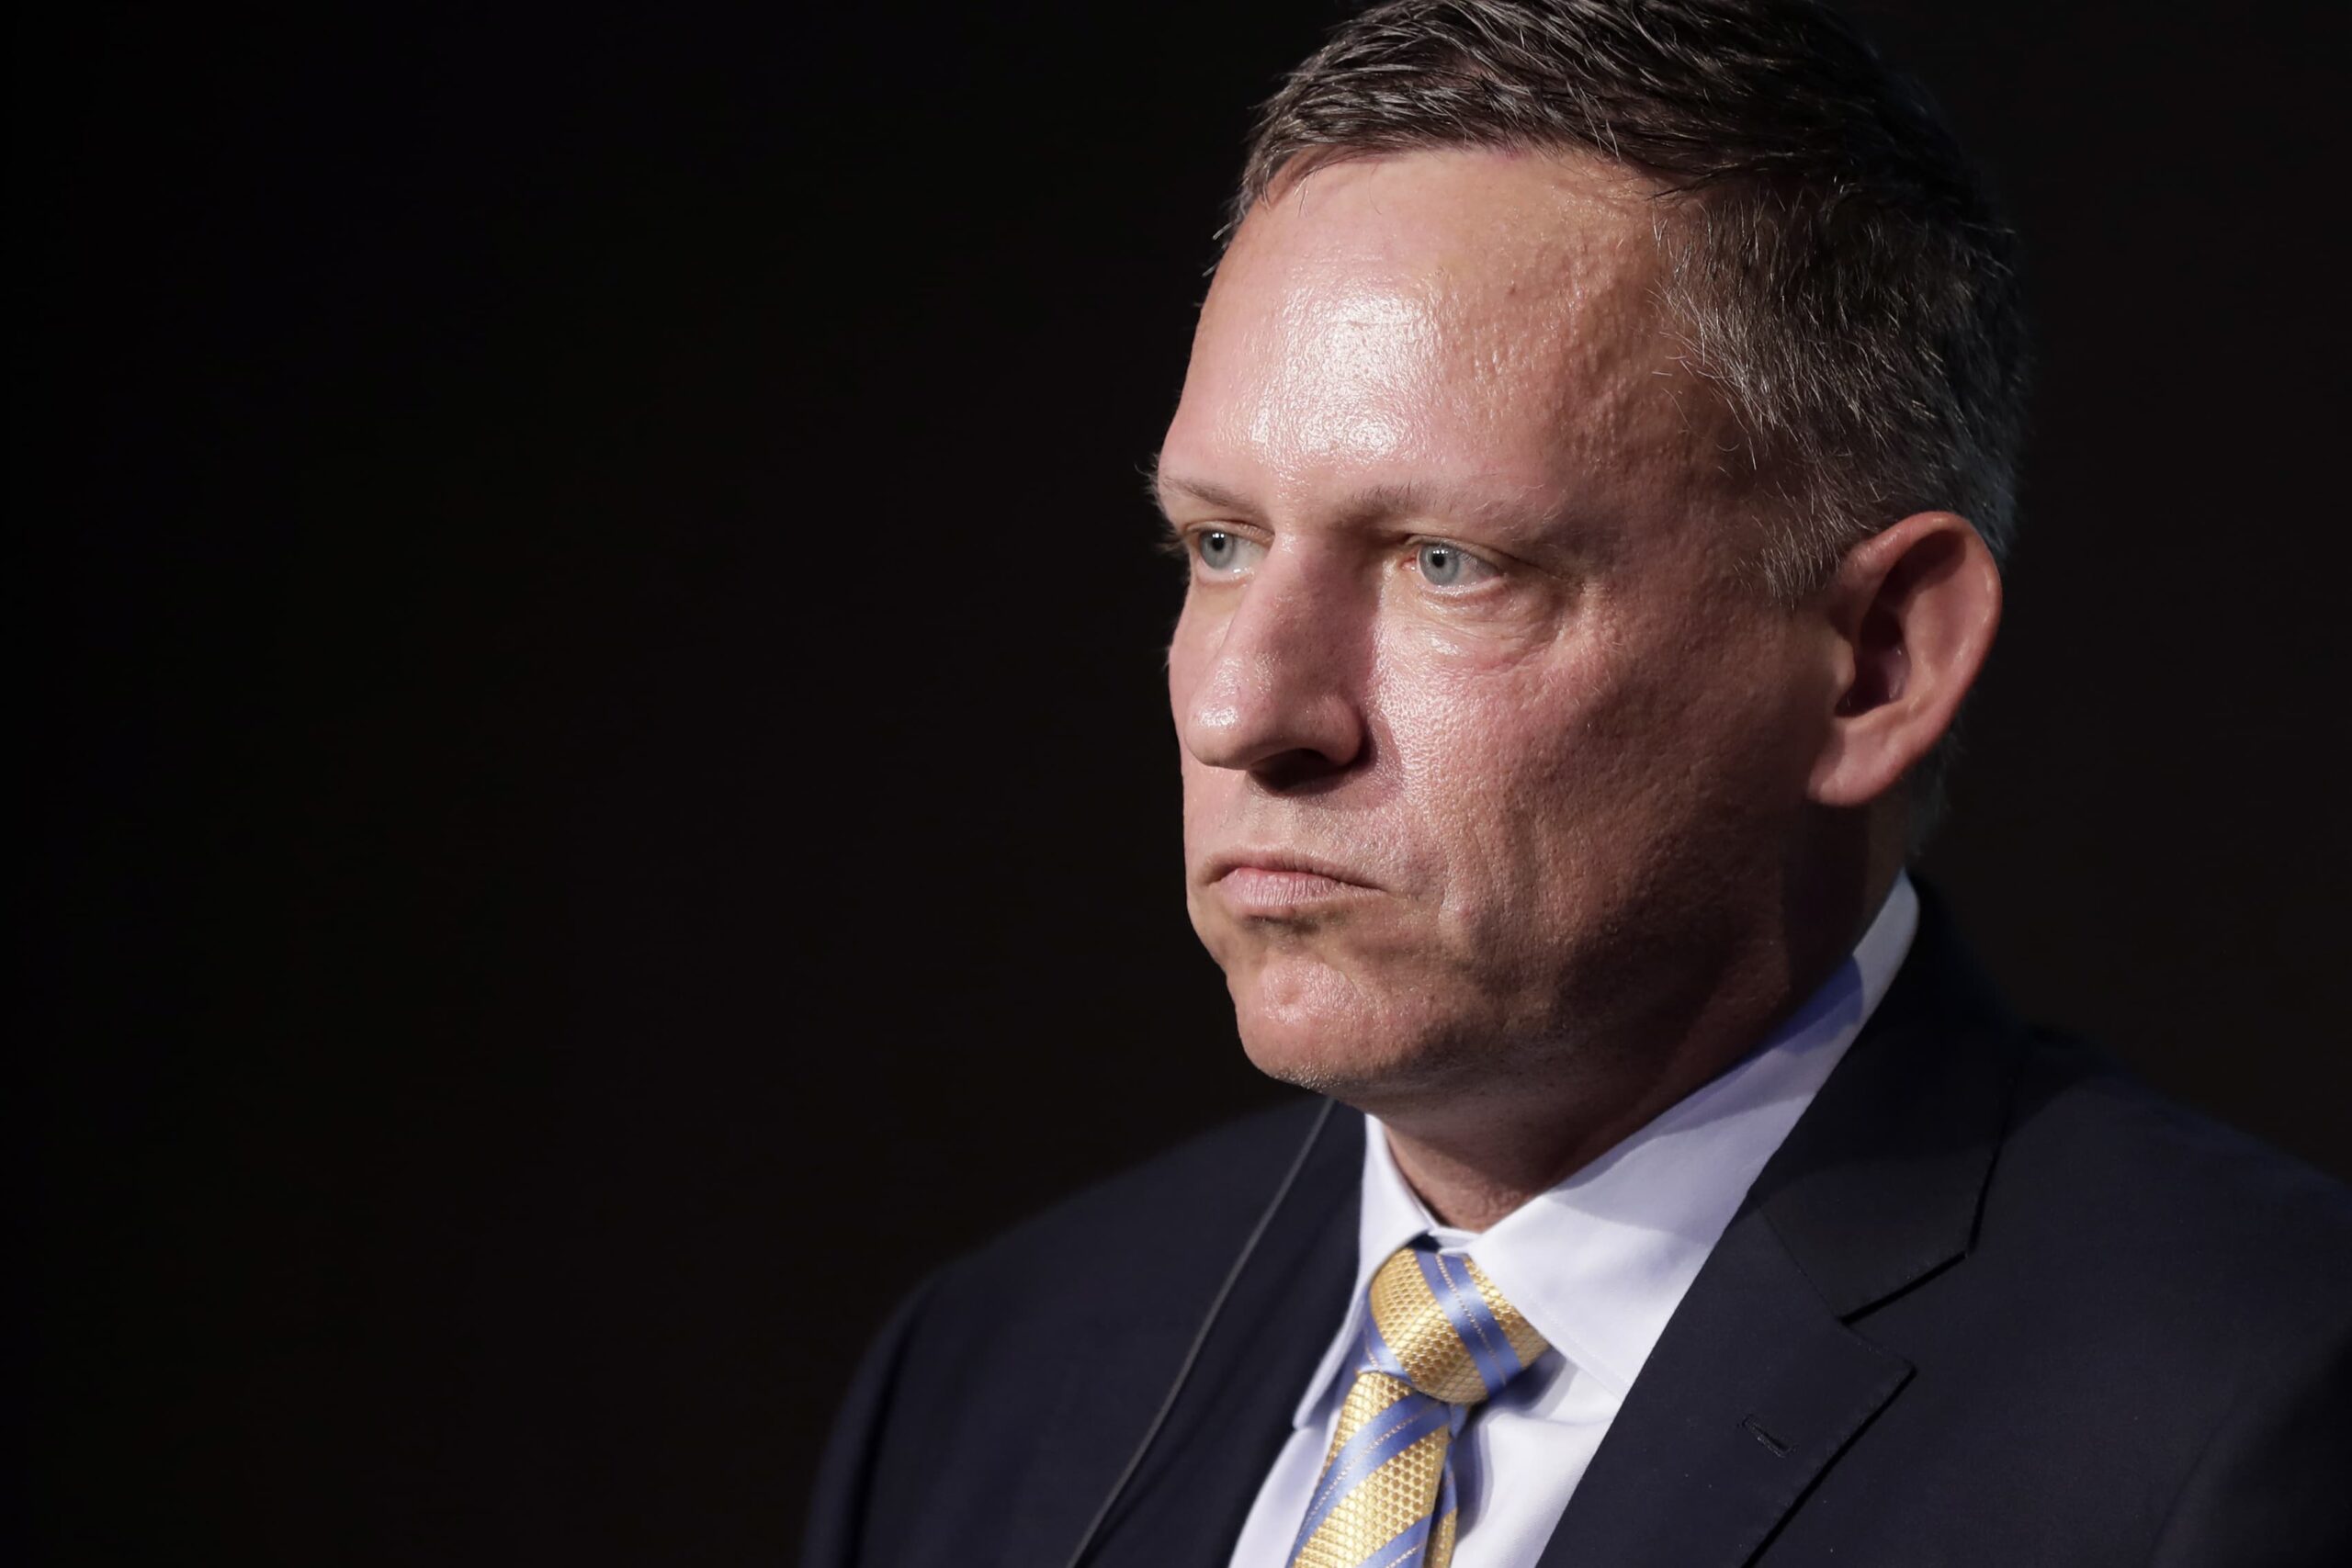 House tax bill would likely force Peter Thiel to pull $5 billion from his IRA